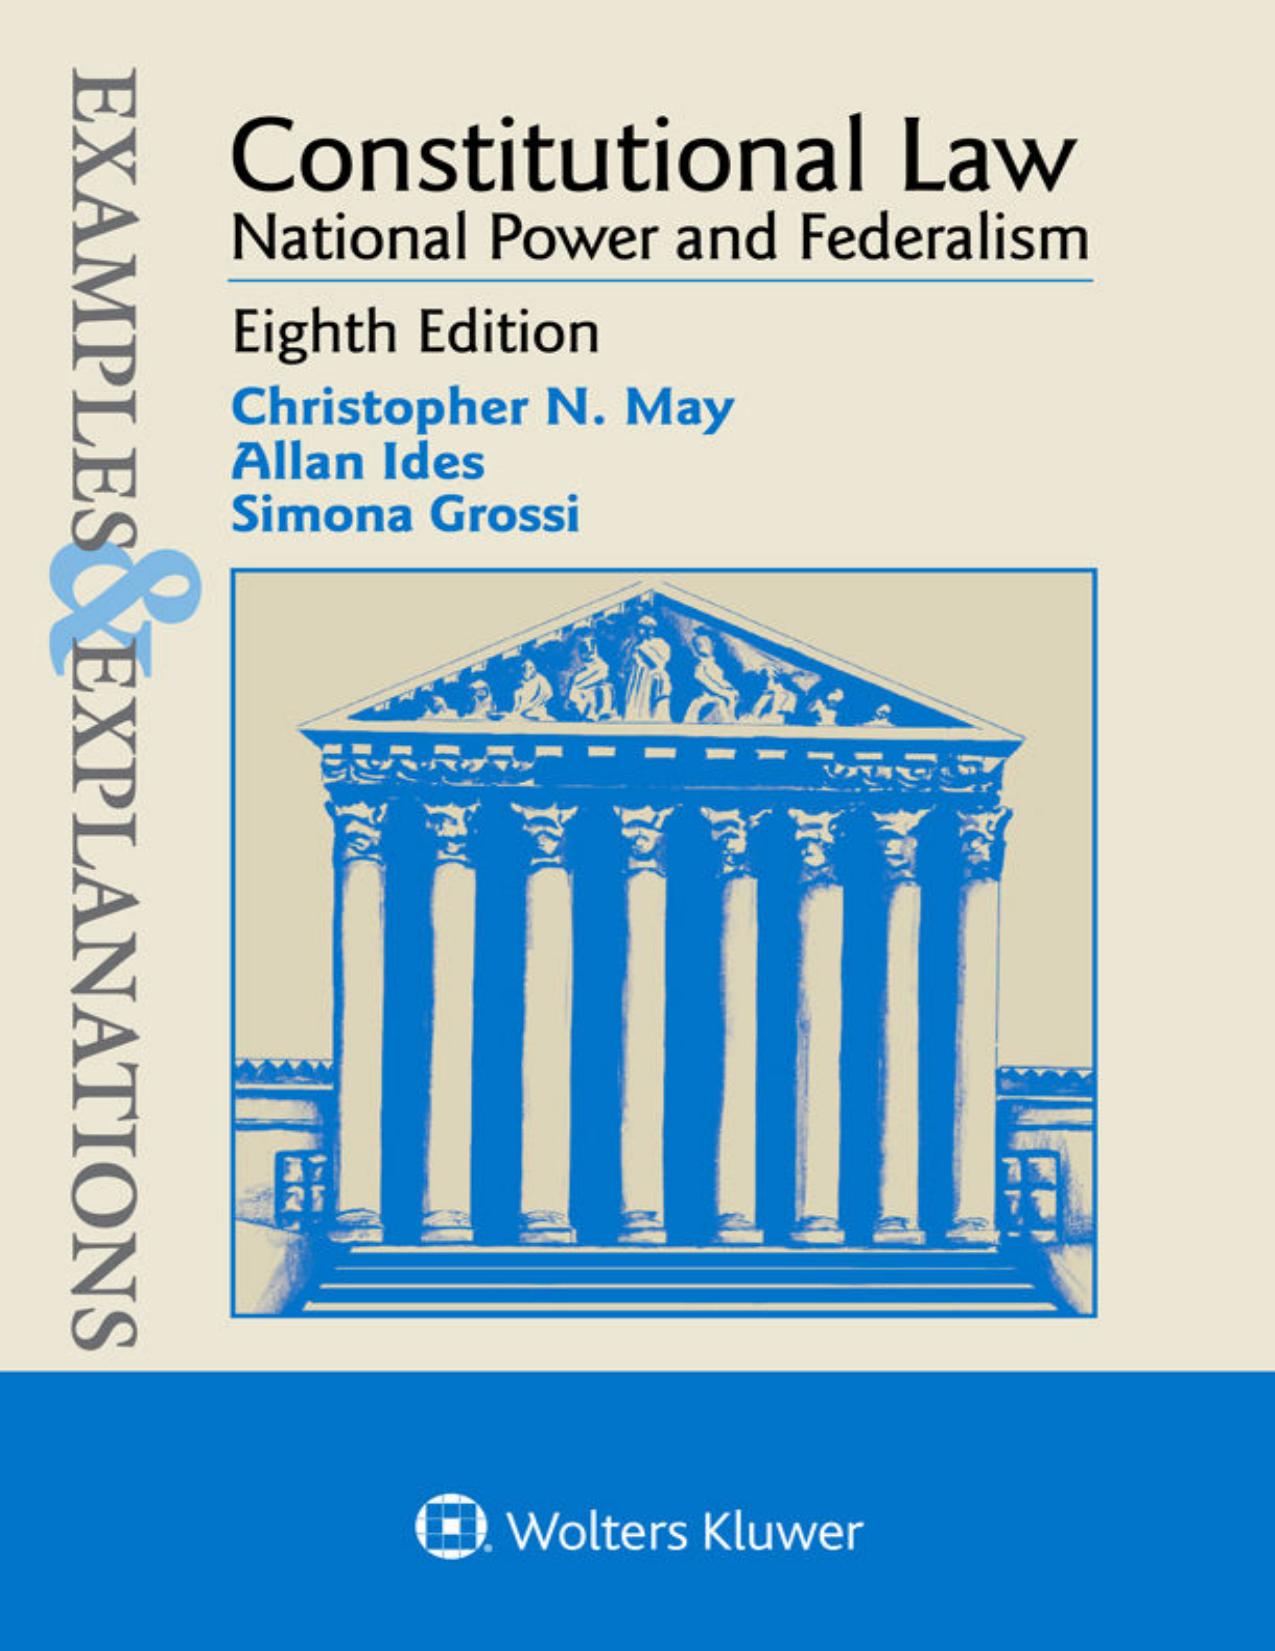 Examples and Explanations for Constitutional Law:  National Power tions Series  8th Edition   by Christopher N. May ,  Allan Ides,  Simona Grossi